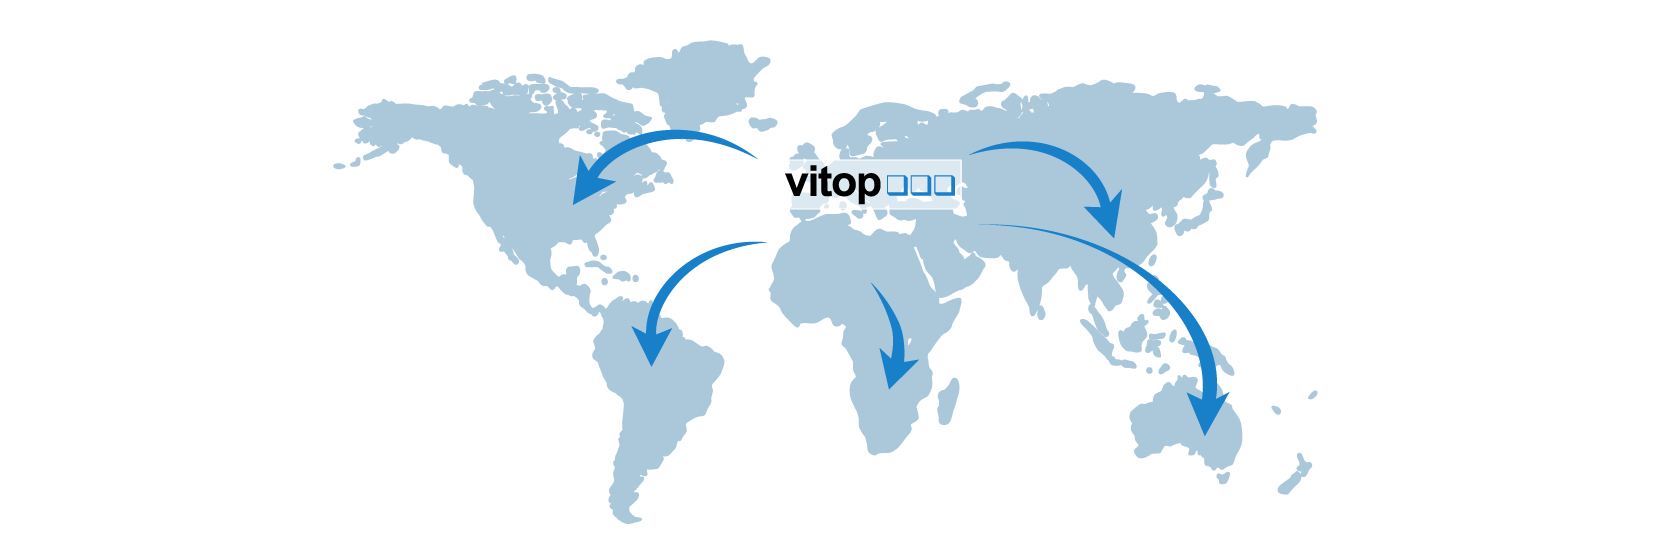 Vitop is an International Company of Original Taps and accessoires for bag in box